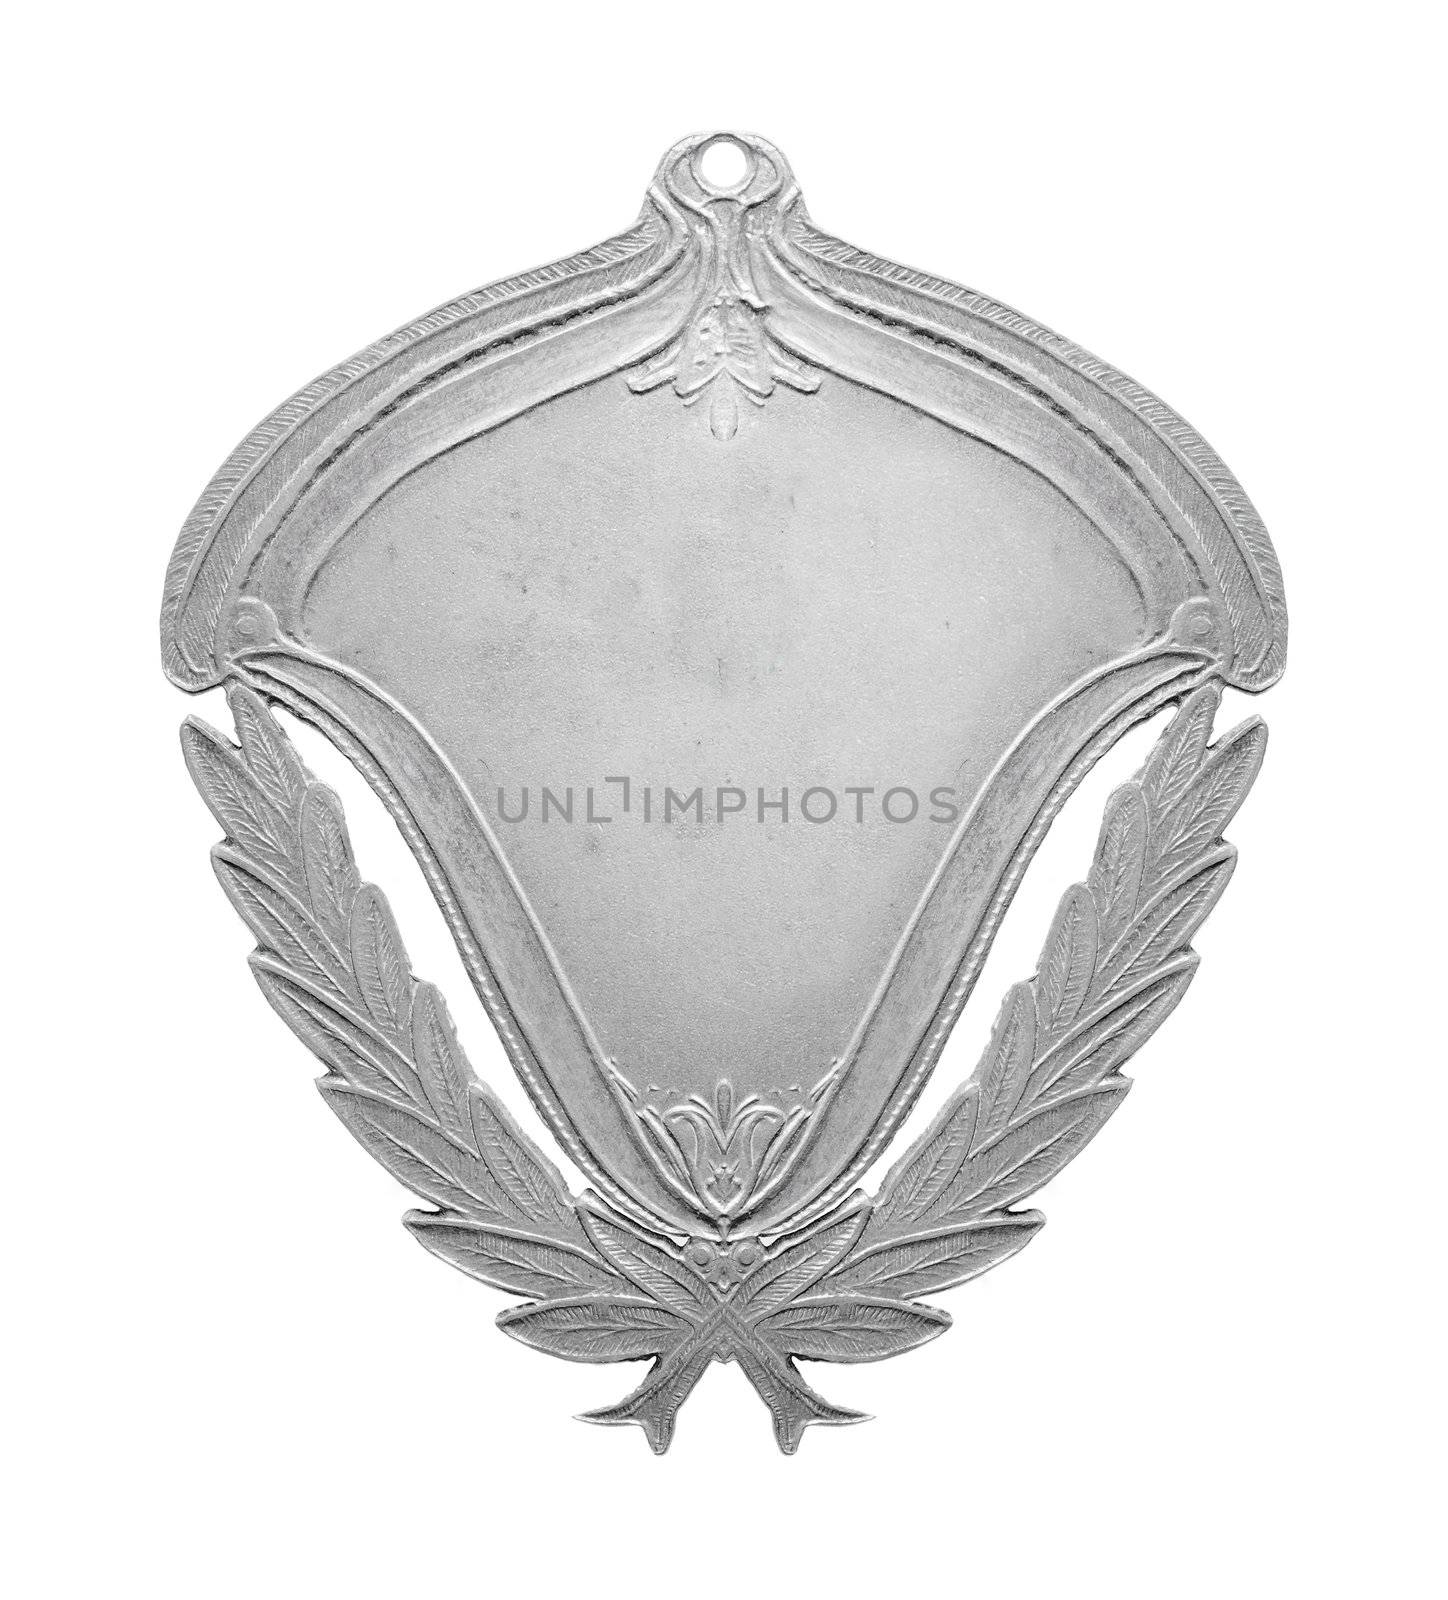 Old silver medal isolated on white.